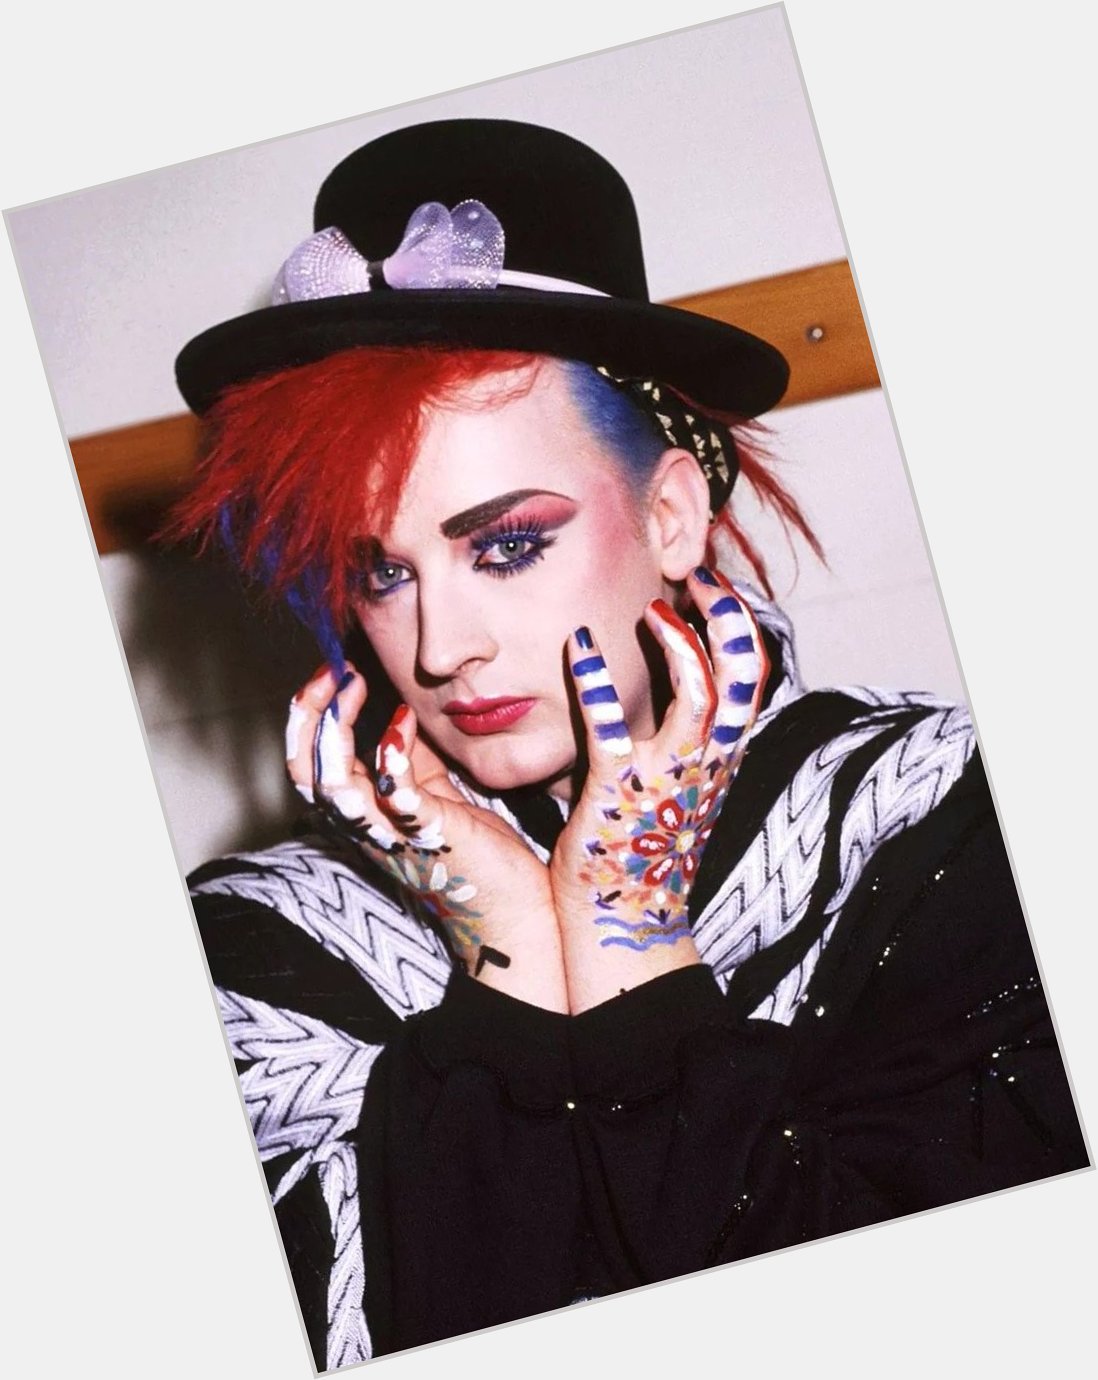 Happy Birthday, Boy George! Today is YOUR day! 